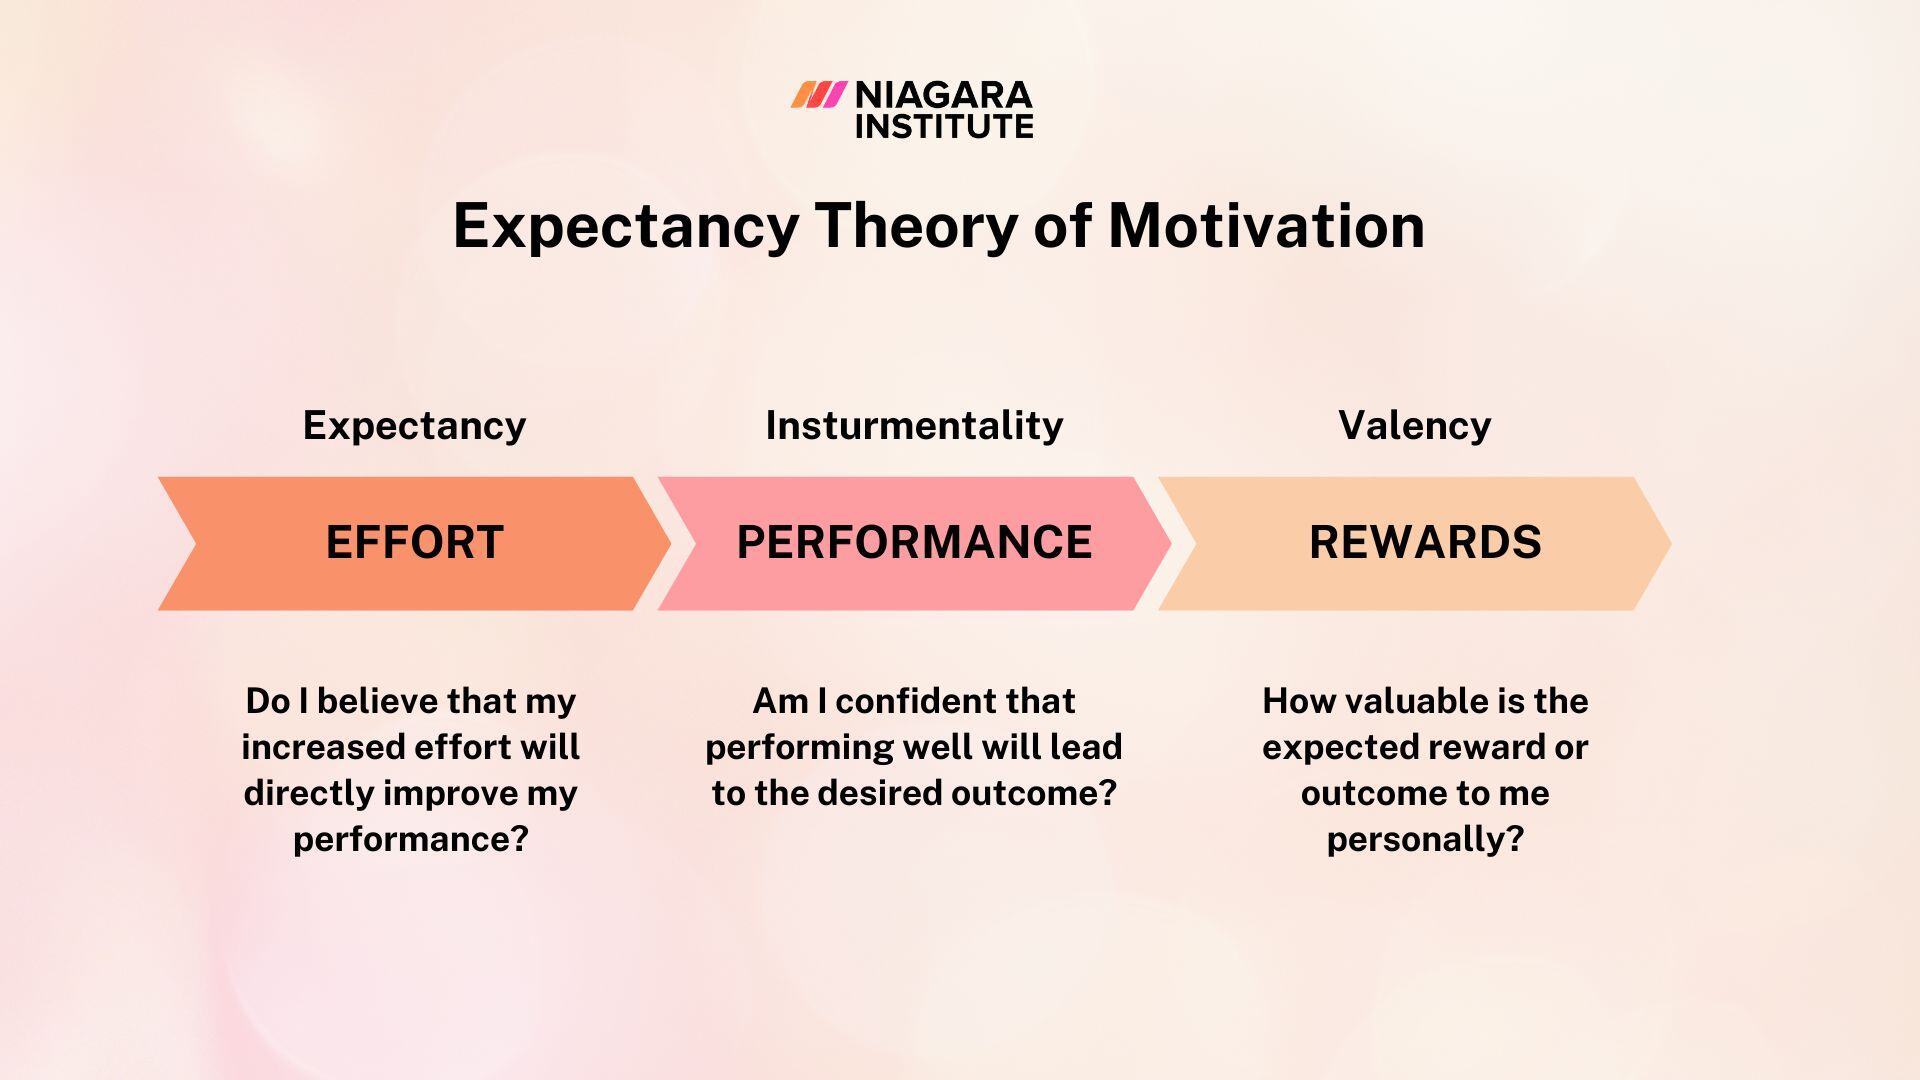 Elements of Vroom's Expectancy Theory of Motivation